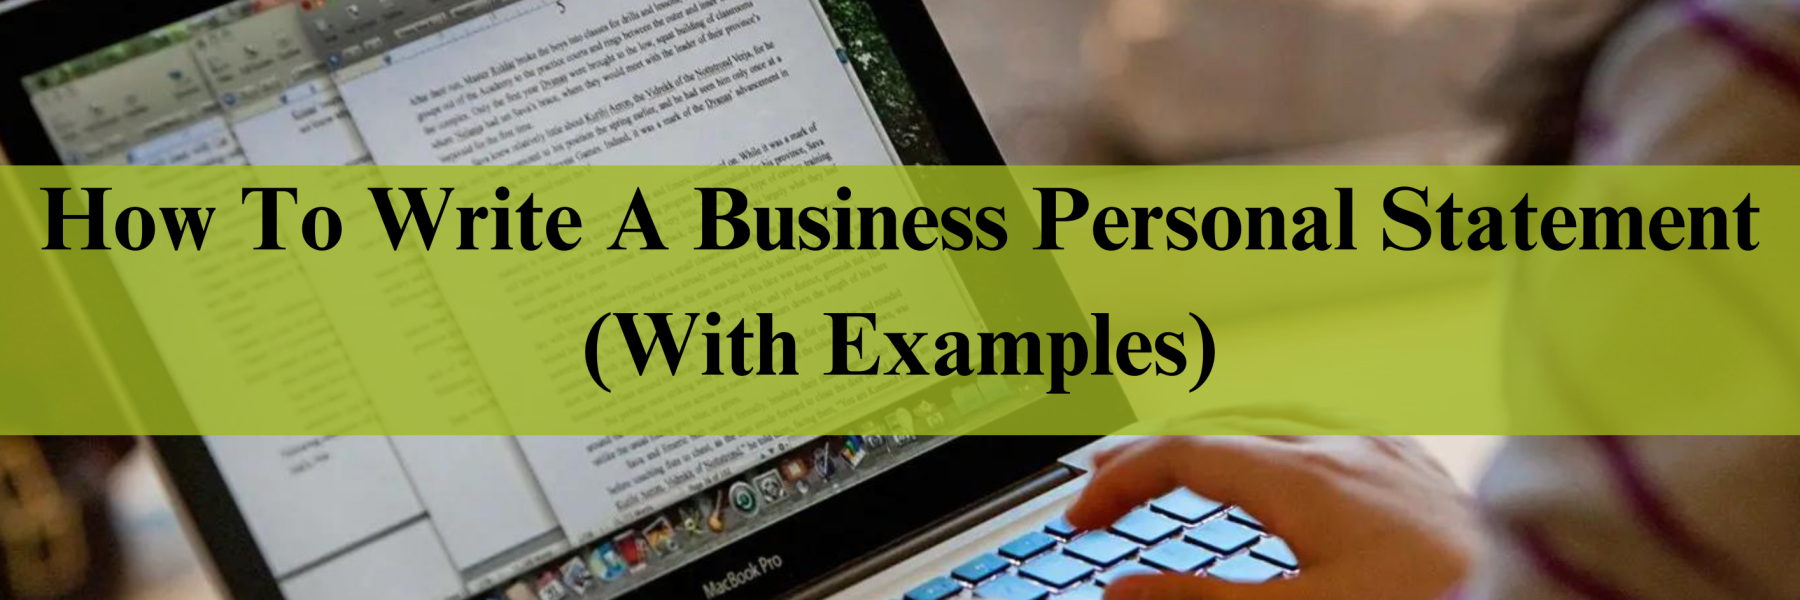 how to write a business personal statement